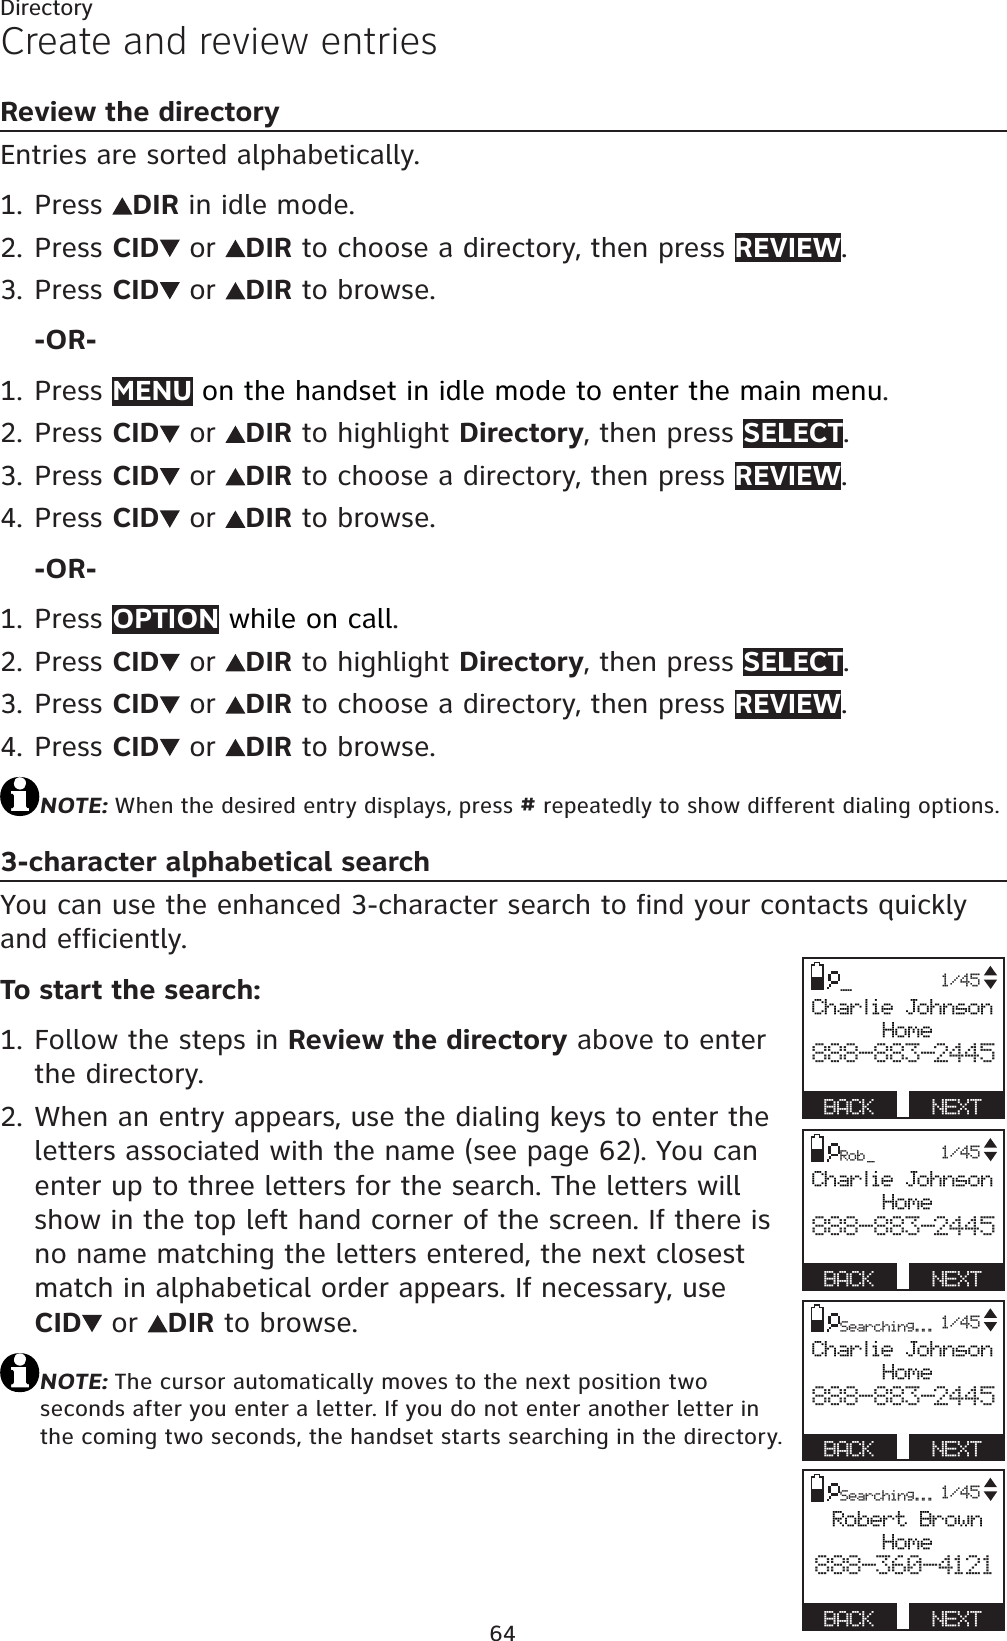 64DirectoryCreate and review entriesReview the directoryEntries are sorted alphabetically.Press  DIR in idle mode.Press CID  or  DIR to choose a directory, then press REVIEW.Press CID  or  DIR to browse.-OR-Press MENU on the handset in idle mode to enter the main menu.Press CID  or  DIR to highlight Directory, then press SELECT.Press CID  or  DIR to choose a directory, then press REVIEW.Press CID  or  DIR to browse.-OR-Press OPTION while on call.Press CID  or  DIR to highlight Directory, then press SELECT.Press CID  or  DIR to choose a directory, then press REVIEW.Press CID  or  DIR to browse.NOTE:When the desired entry displays, press # repeatedly to show different dialing options.3-character alphabetical searchYou can use the enhanced 3-character search to find your contacts quickly and efficiently.To start the search:Follow the steps in Review the directory above to enter the directory.When an entry appears, use the dialing keys to enter the letters associated with the name (see page 62). You can enter up to three letters for the search. The letters will show in the top left hand corner of the screen. If there is no name matching the letters entered, the next closest match in alphabetical order appears. If necessary, useCID  or  DIR to browse.NOTE:The cursor automatically moves to the next position two seconds after you enter a letter. If you do not enter another letter in the coming two seconds, the handset starts searching in the directory.1.2.3.1.2.3.4.1.2.3.4.1.2._Charlie JohnsonHome888-883-2445BACK   NEXT1/45Searching...Charlie JohnsonHome888-883-2445BACK   NEXT1/45Rob _Charlie JohnsonHome888-883-2445BACK   NEXT1/45Searching...Robert BrownHome888-360-4121BACK   NEXT1/45